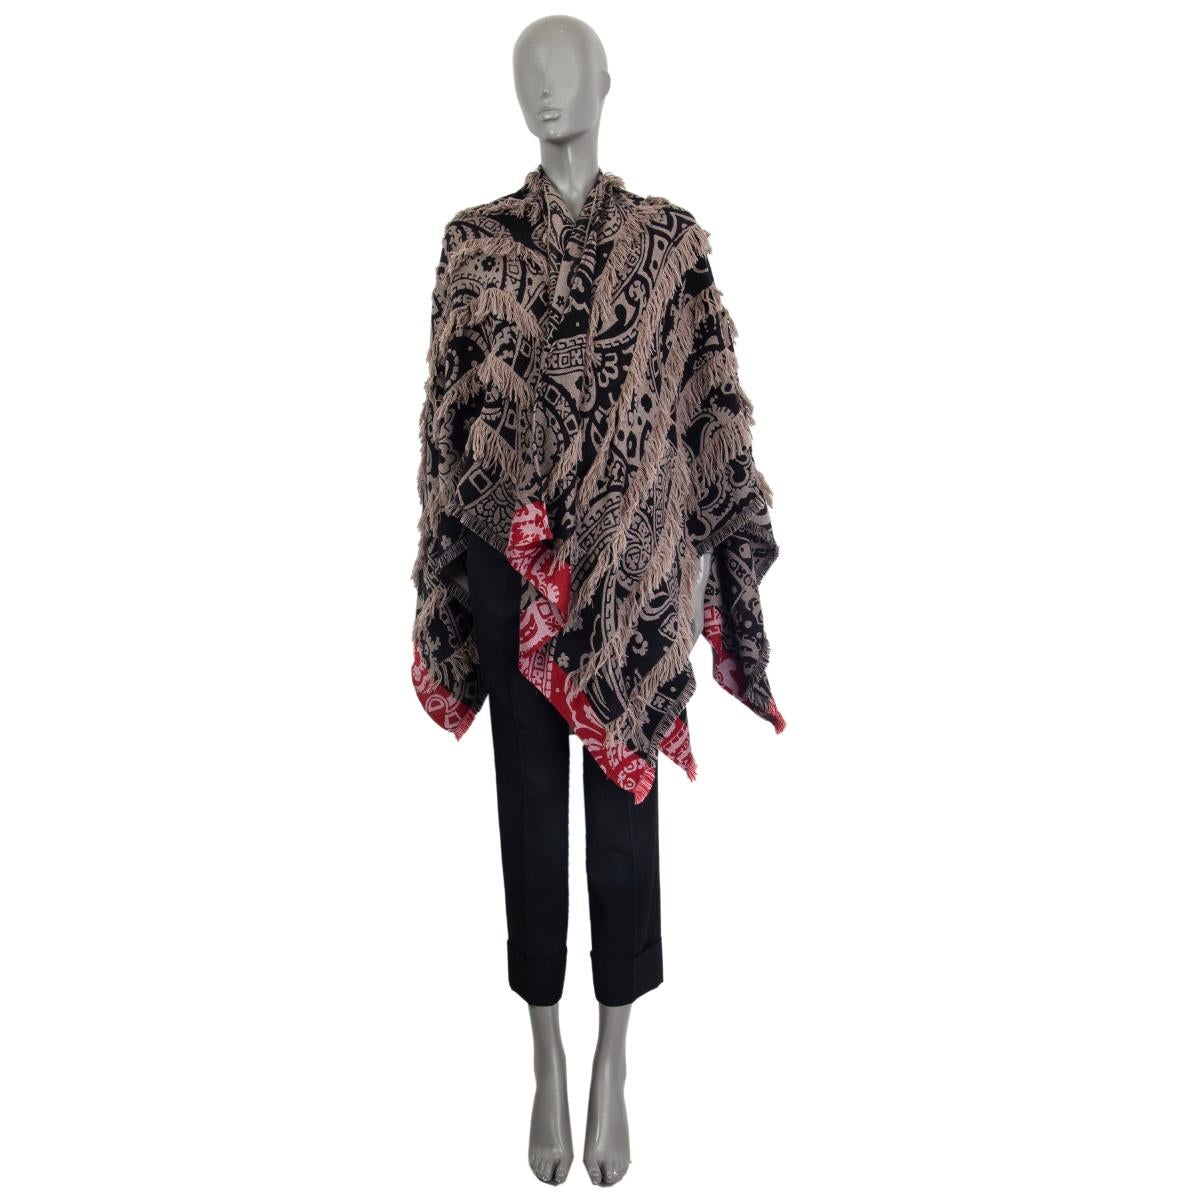 authentic Etro paisley print fringe poncho in black, taupe, red and pink wool and cashmere blend (assumed as tag is missing). Unlined. Has been worn and is in excellent condition.

Measurements
Tag Size	OS
Size	one size
Length	70cm (27.3in)

The